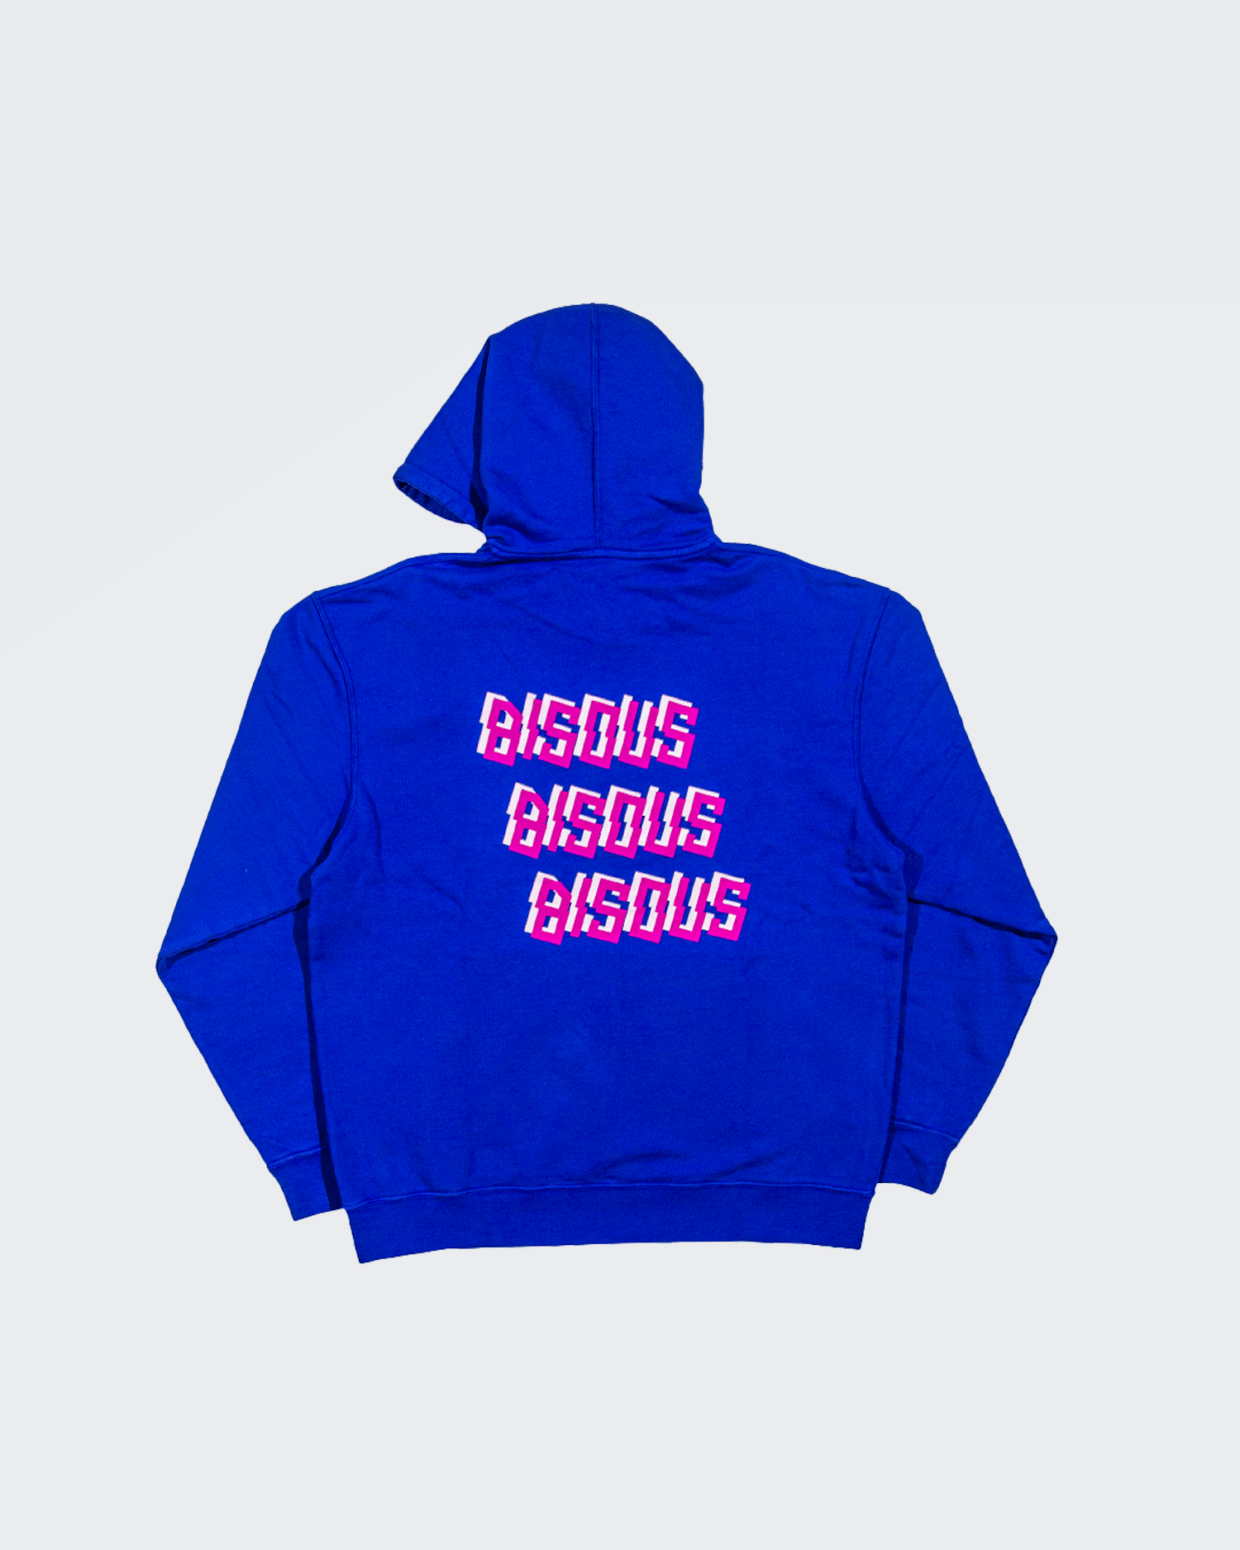 Bisous Bisous Bisous x3 Hoodie